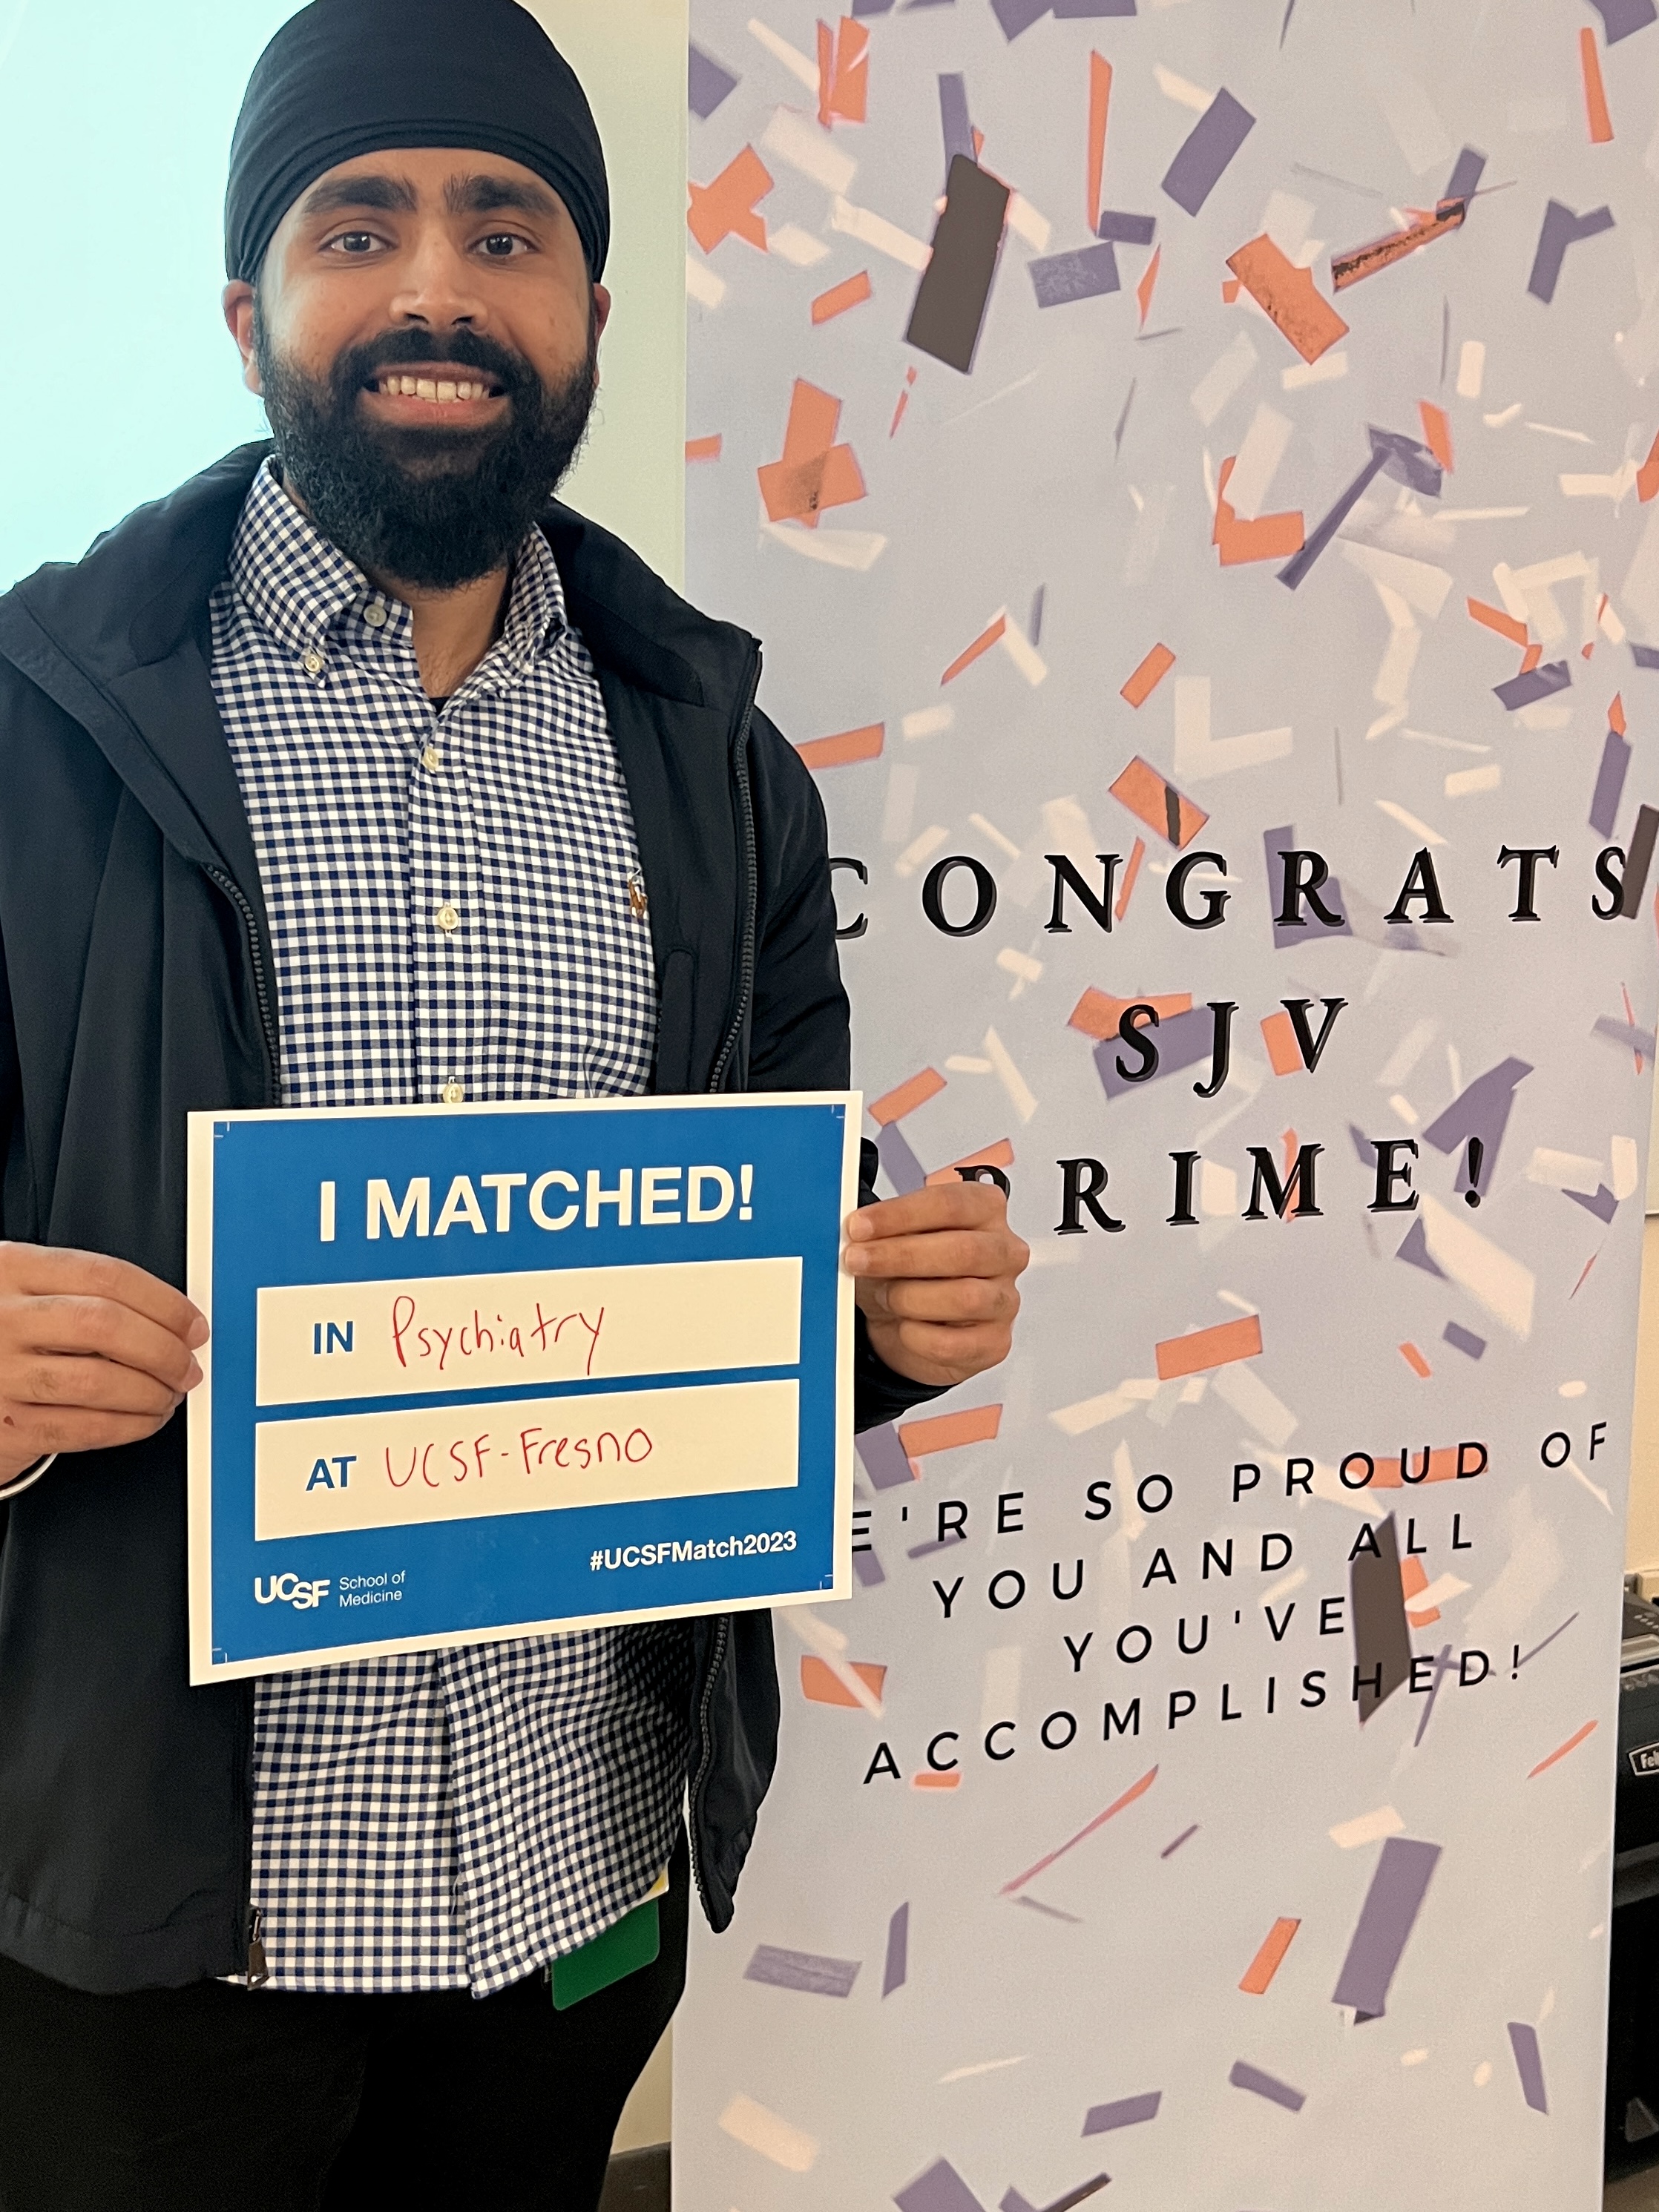 Man standing holding a sign that says "I matched"